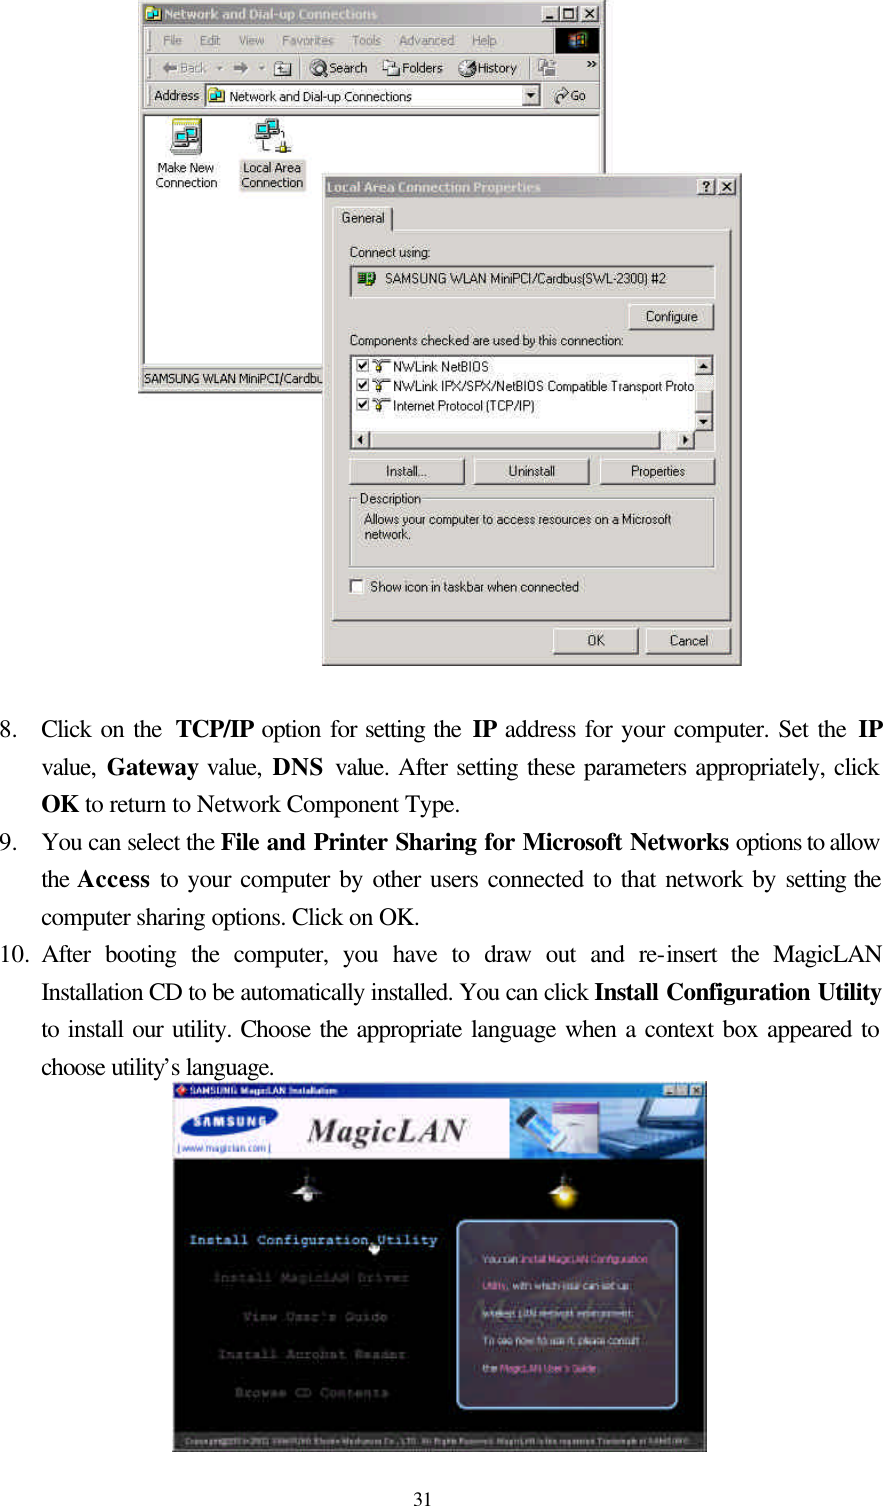  31  8.  Click on the  TCP/IP option for setting the IP address for your computer. Set the IP value,  Gateway value, DNS  value. After setting these parameters appropriately, click OK to return to Network Component Type. 9.  You can select the File and Printer Sharing for Microsoft Networks options to allow the Access to your computer by other users connected to that network by setting the computer sharing options. Click on OK. 10.  After booting the computer, you have to draw out and re-insert the MagicLAN Installation CD to be automatically installed. You can click Install Configuration Utility to install our utility. Choose the appropriate language when a context box appeared to choose utility’s language.   